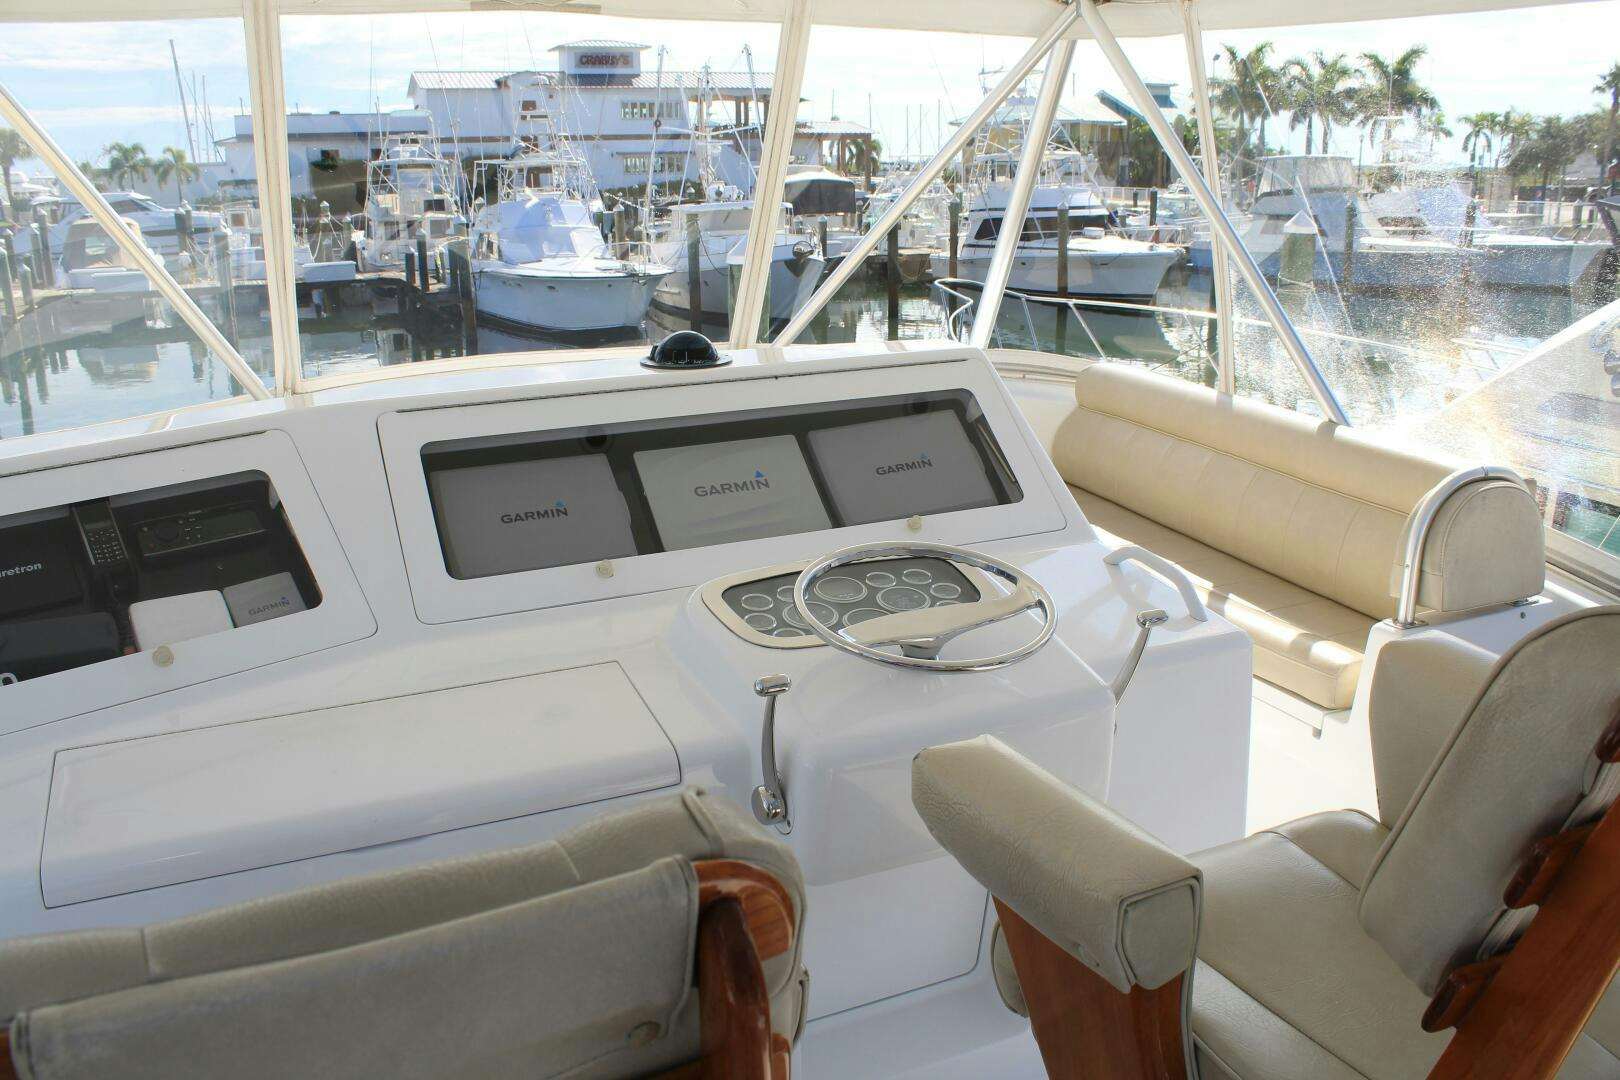 Wild card
Yacht for Sale